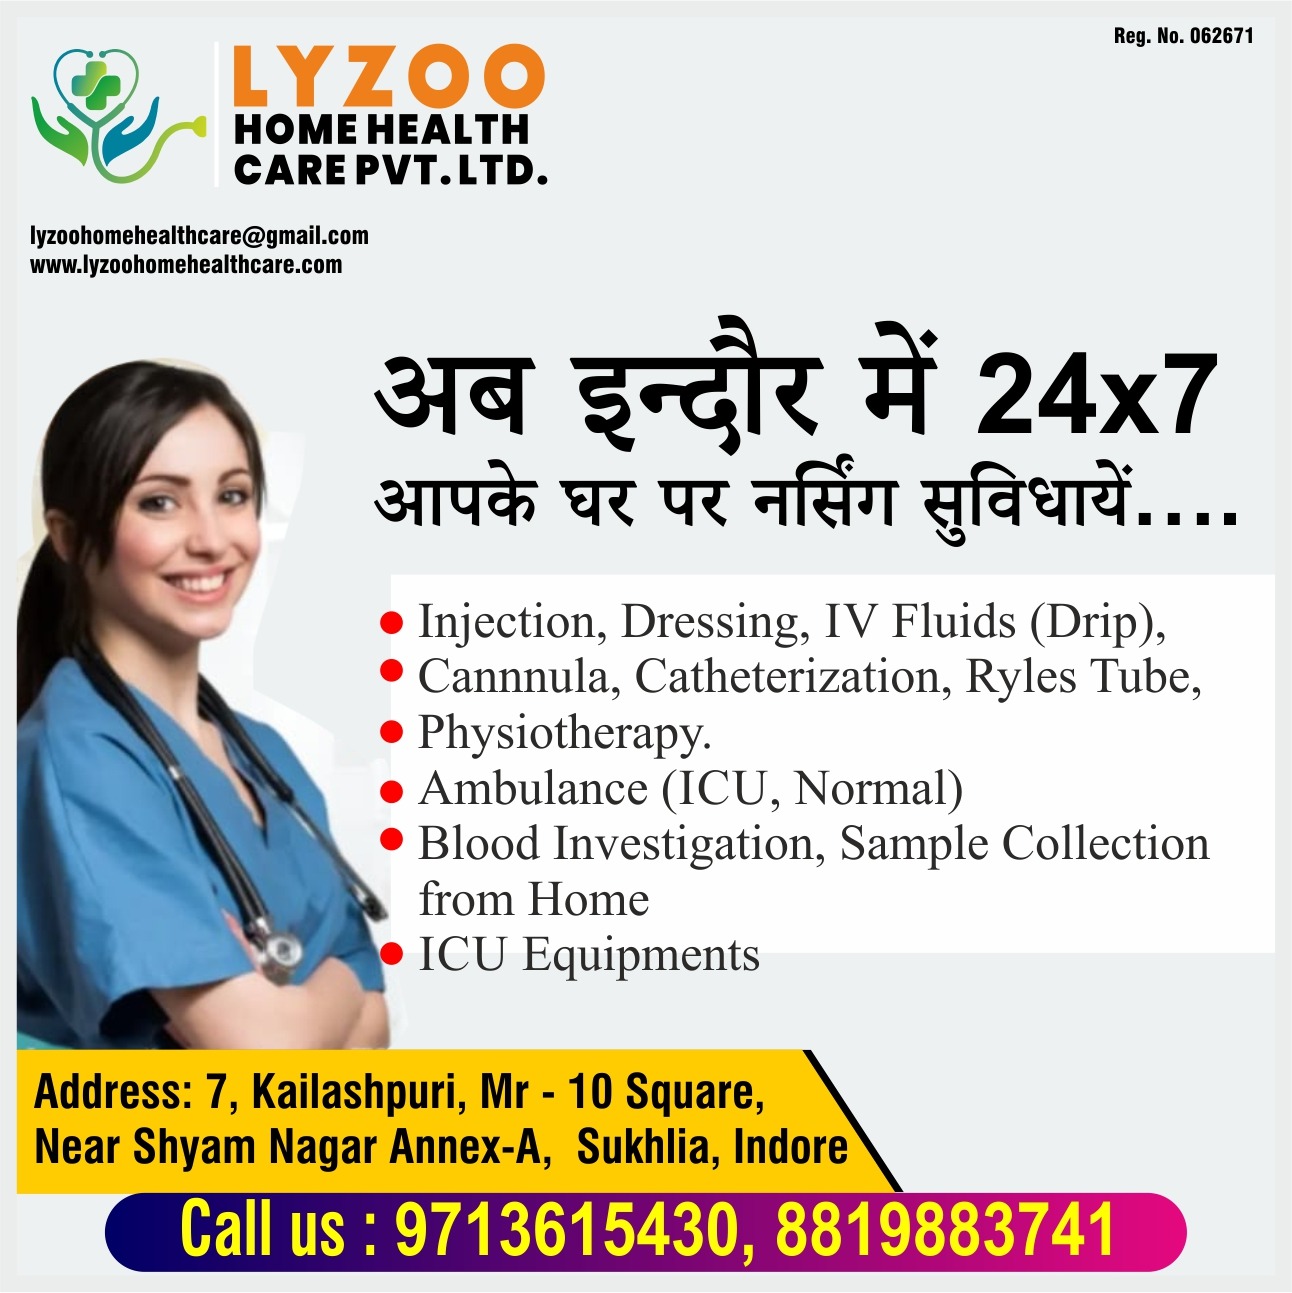 Best Home Health Care Services in Indore